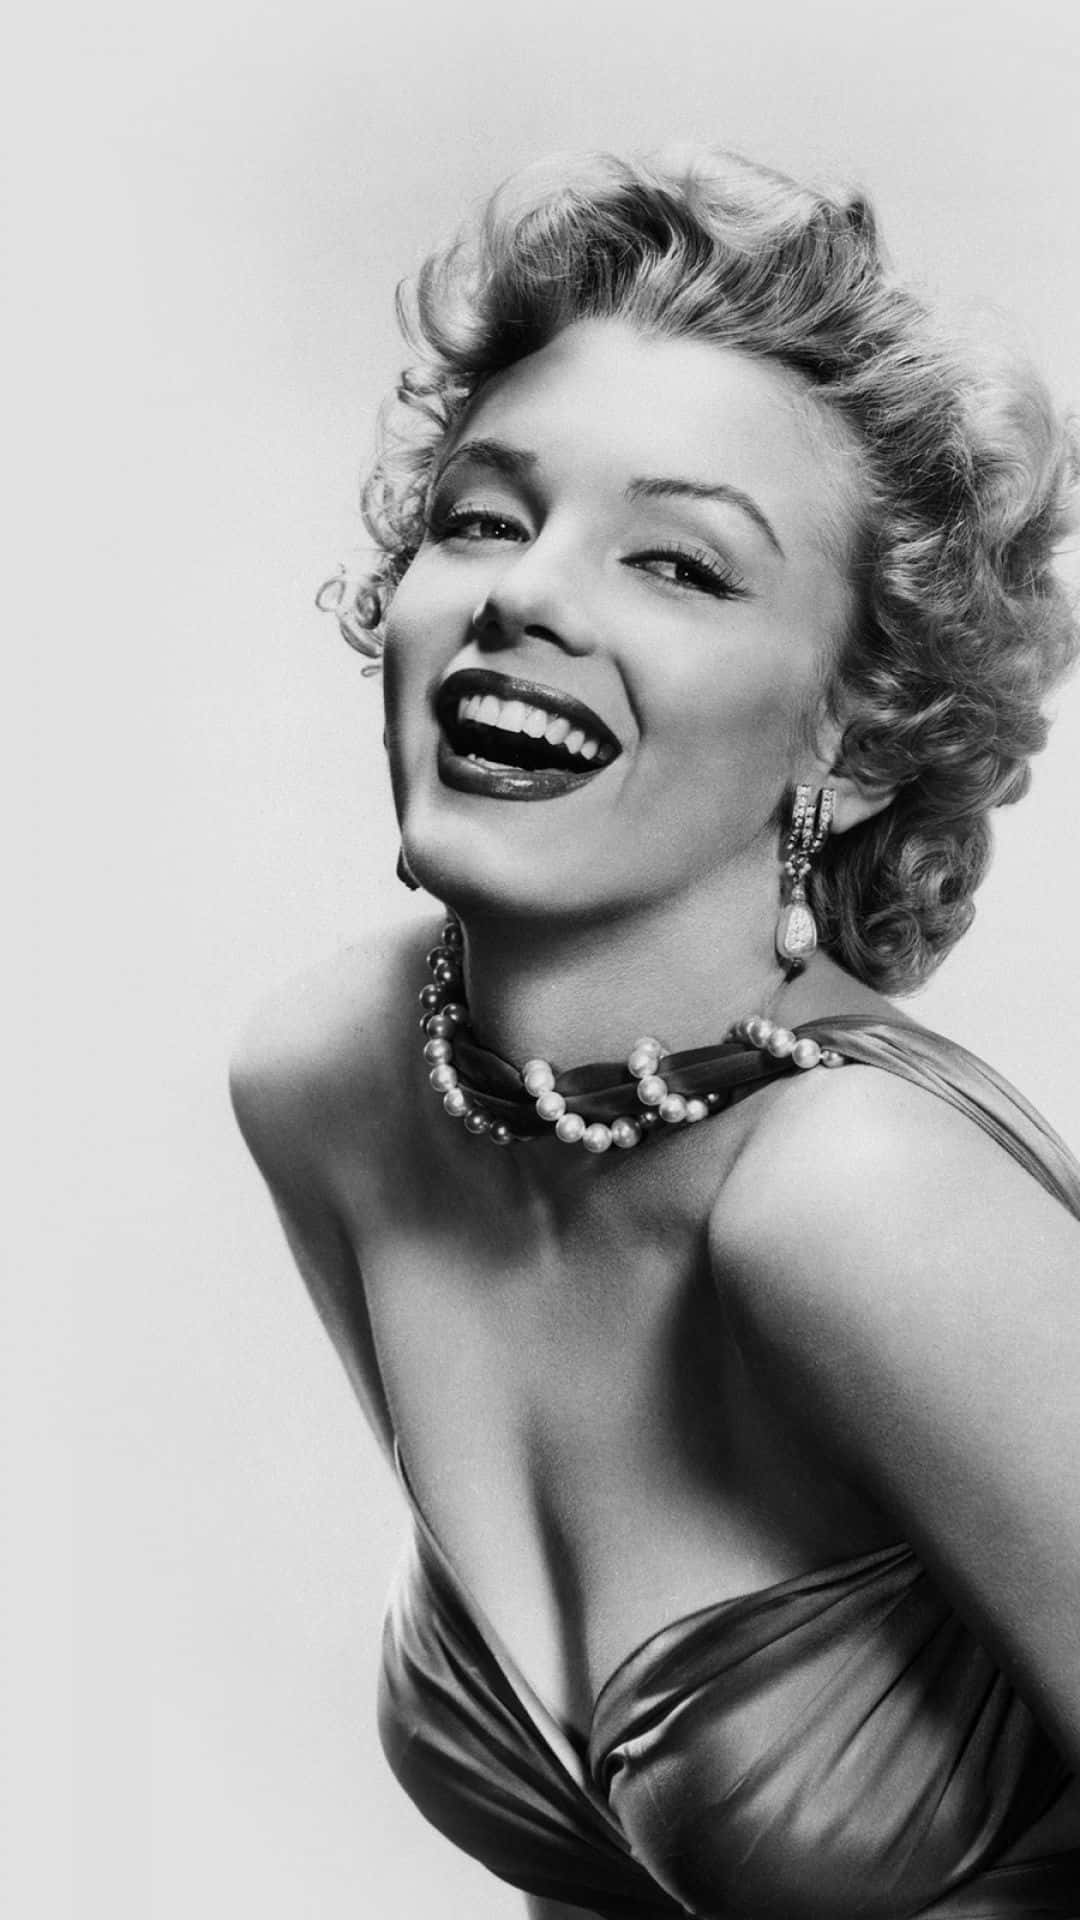 Enjoy a classic Hollywood glamour moment with legendary beauty Marilyn Monroe. Wallpaper